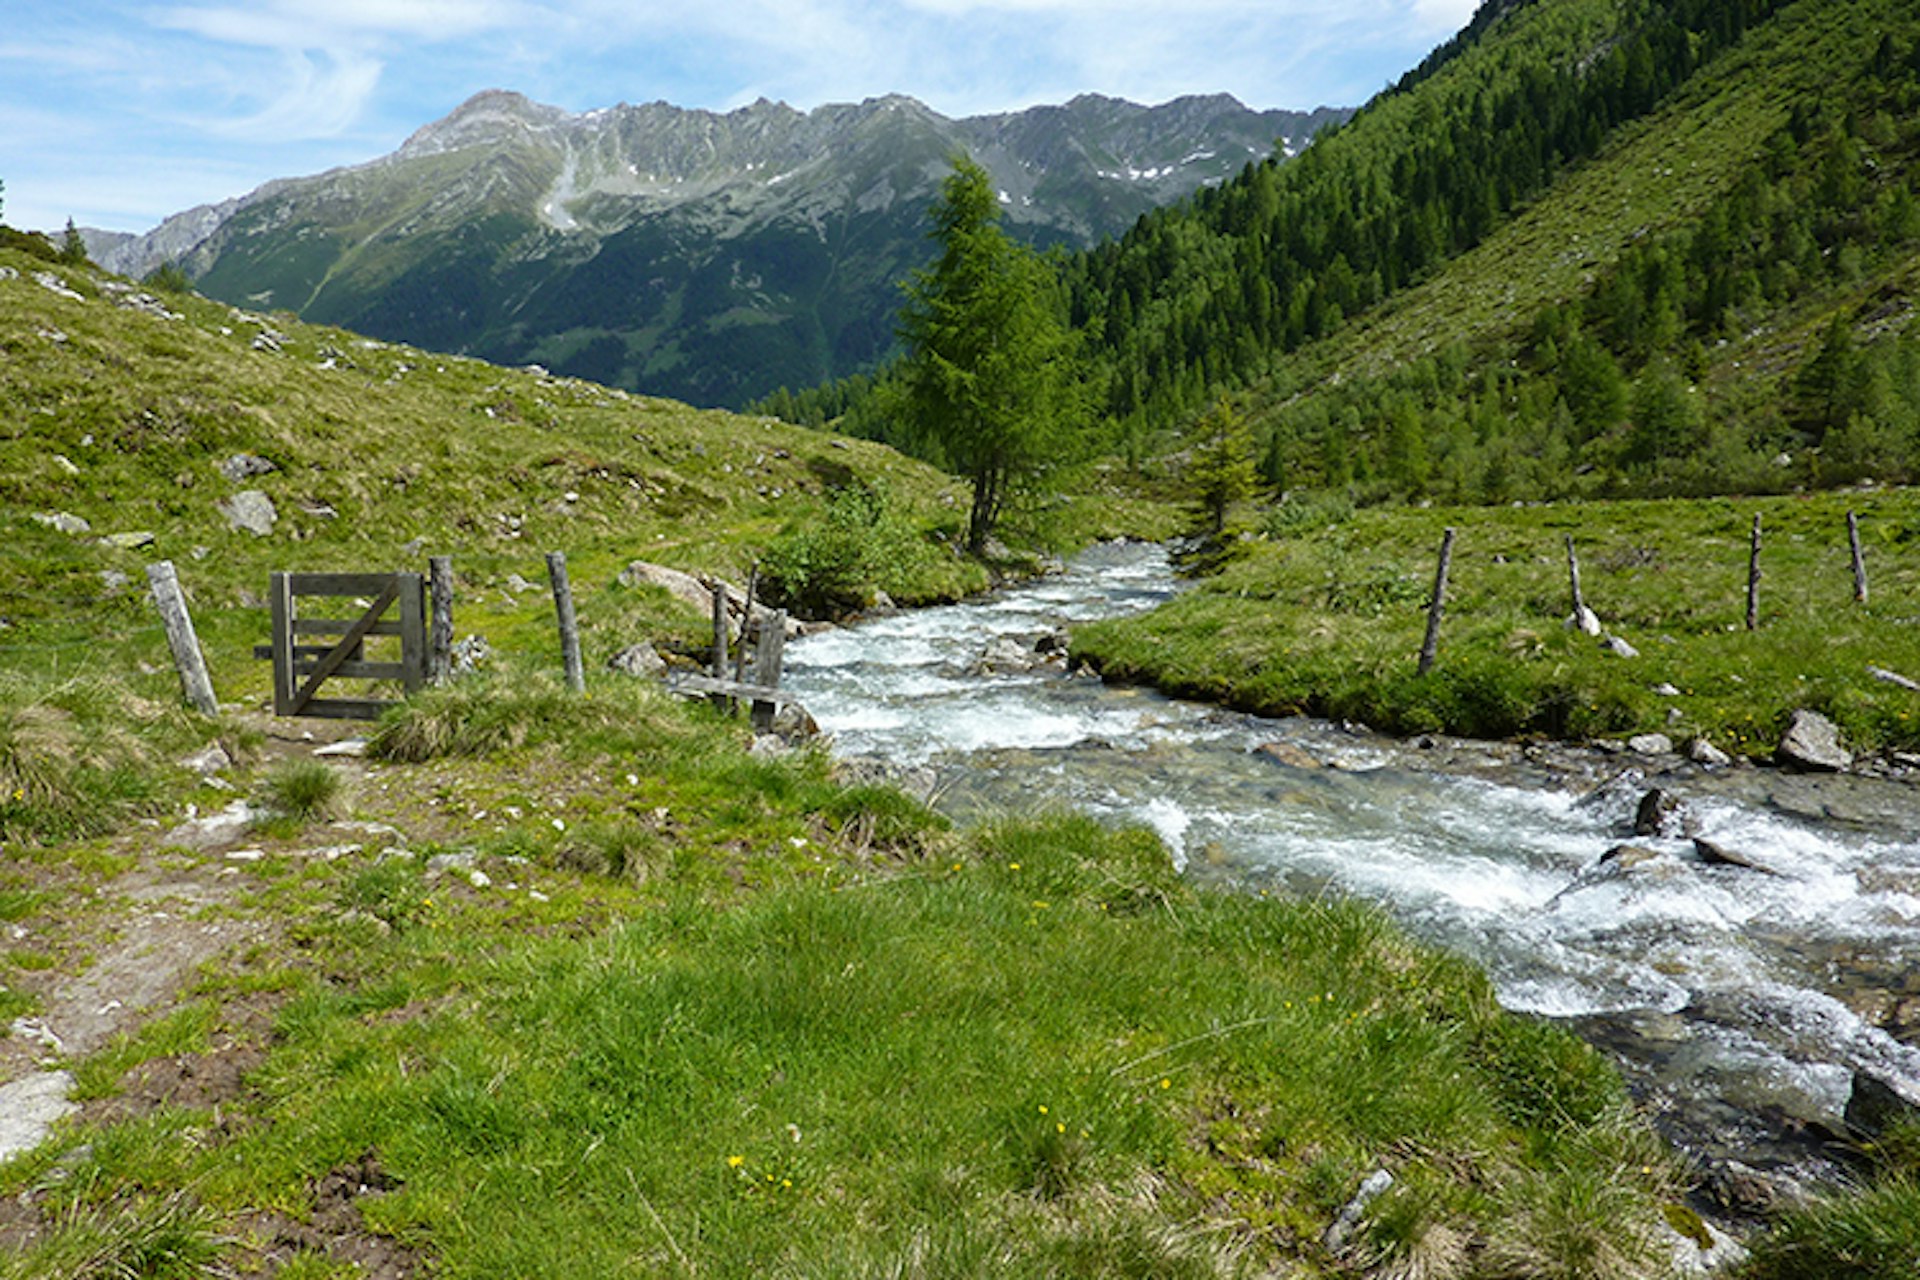 Vorarlberg combines an alpine setting with comparatively reasonable prices. Image by Paul / Shutterstock